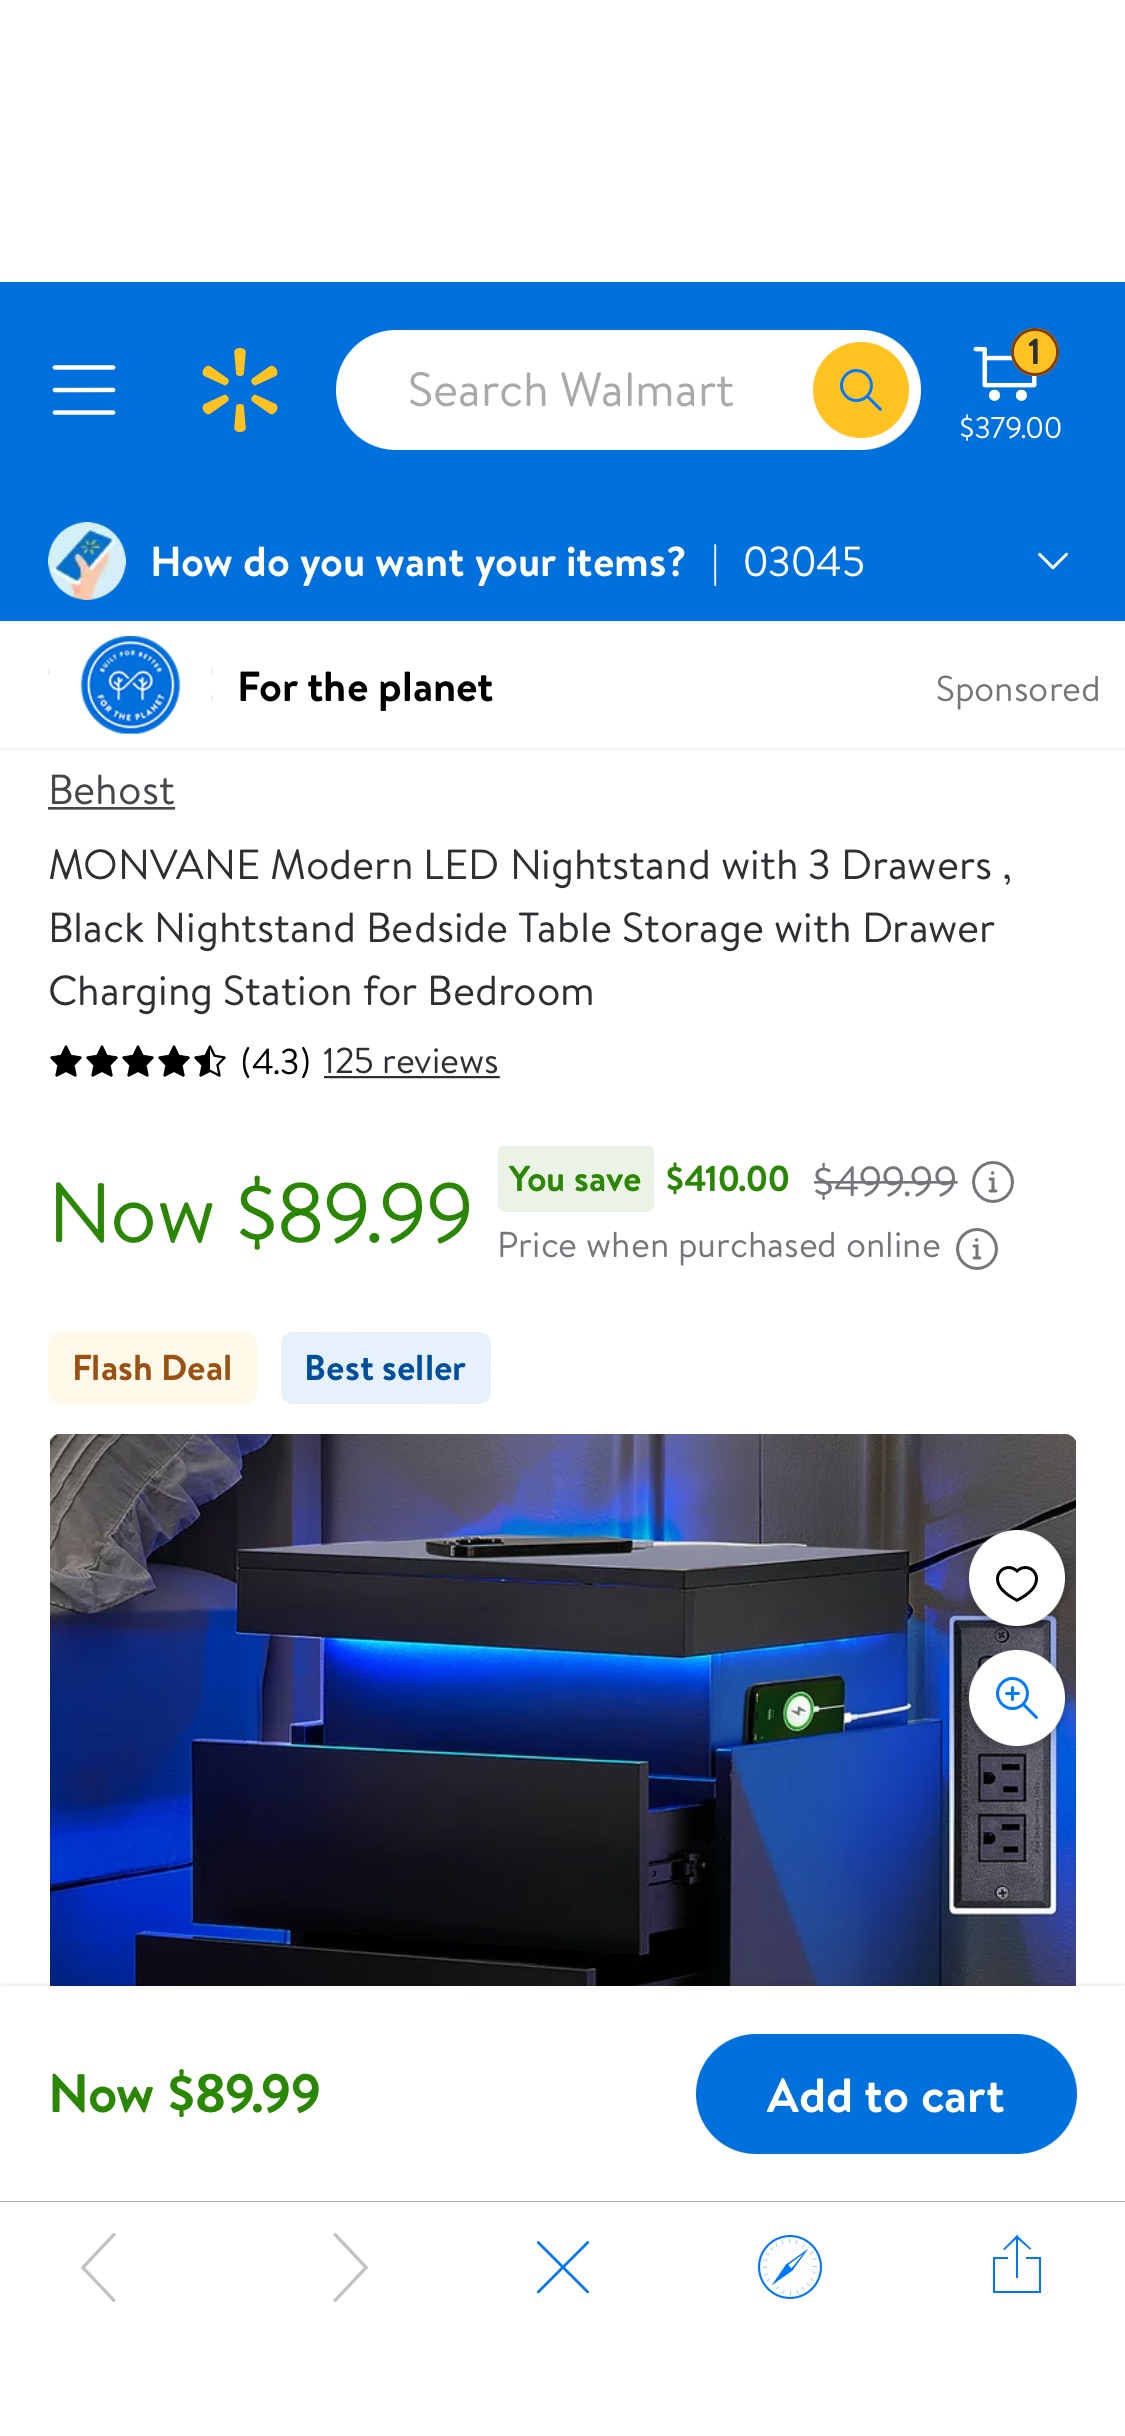 MONVANE Modern LED Nightstand with 3 Drawers , Black Nightstand Bedside Table Storage with Drawer Charging Station for Bedroom - Walmart.com